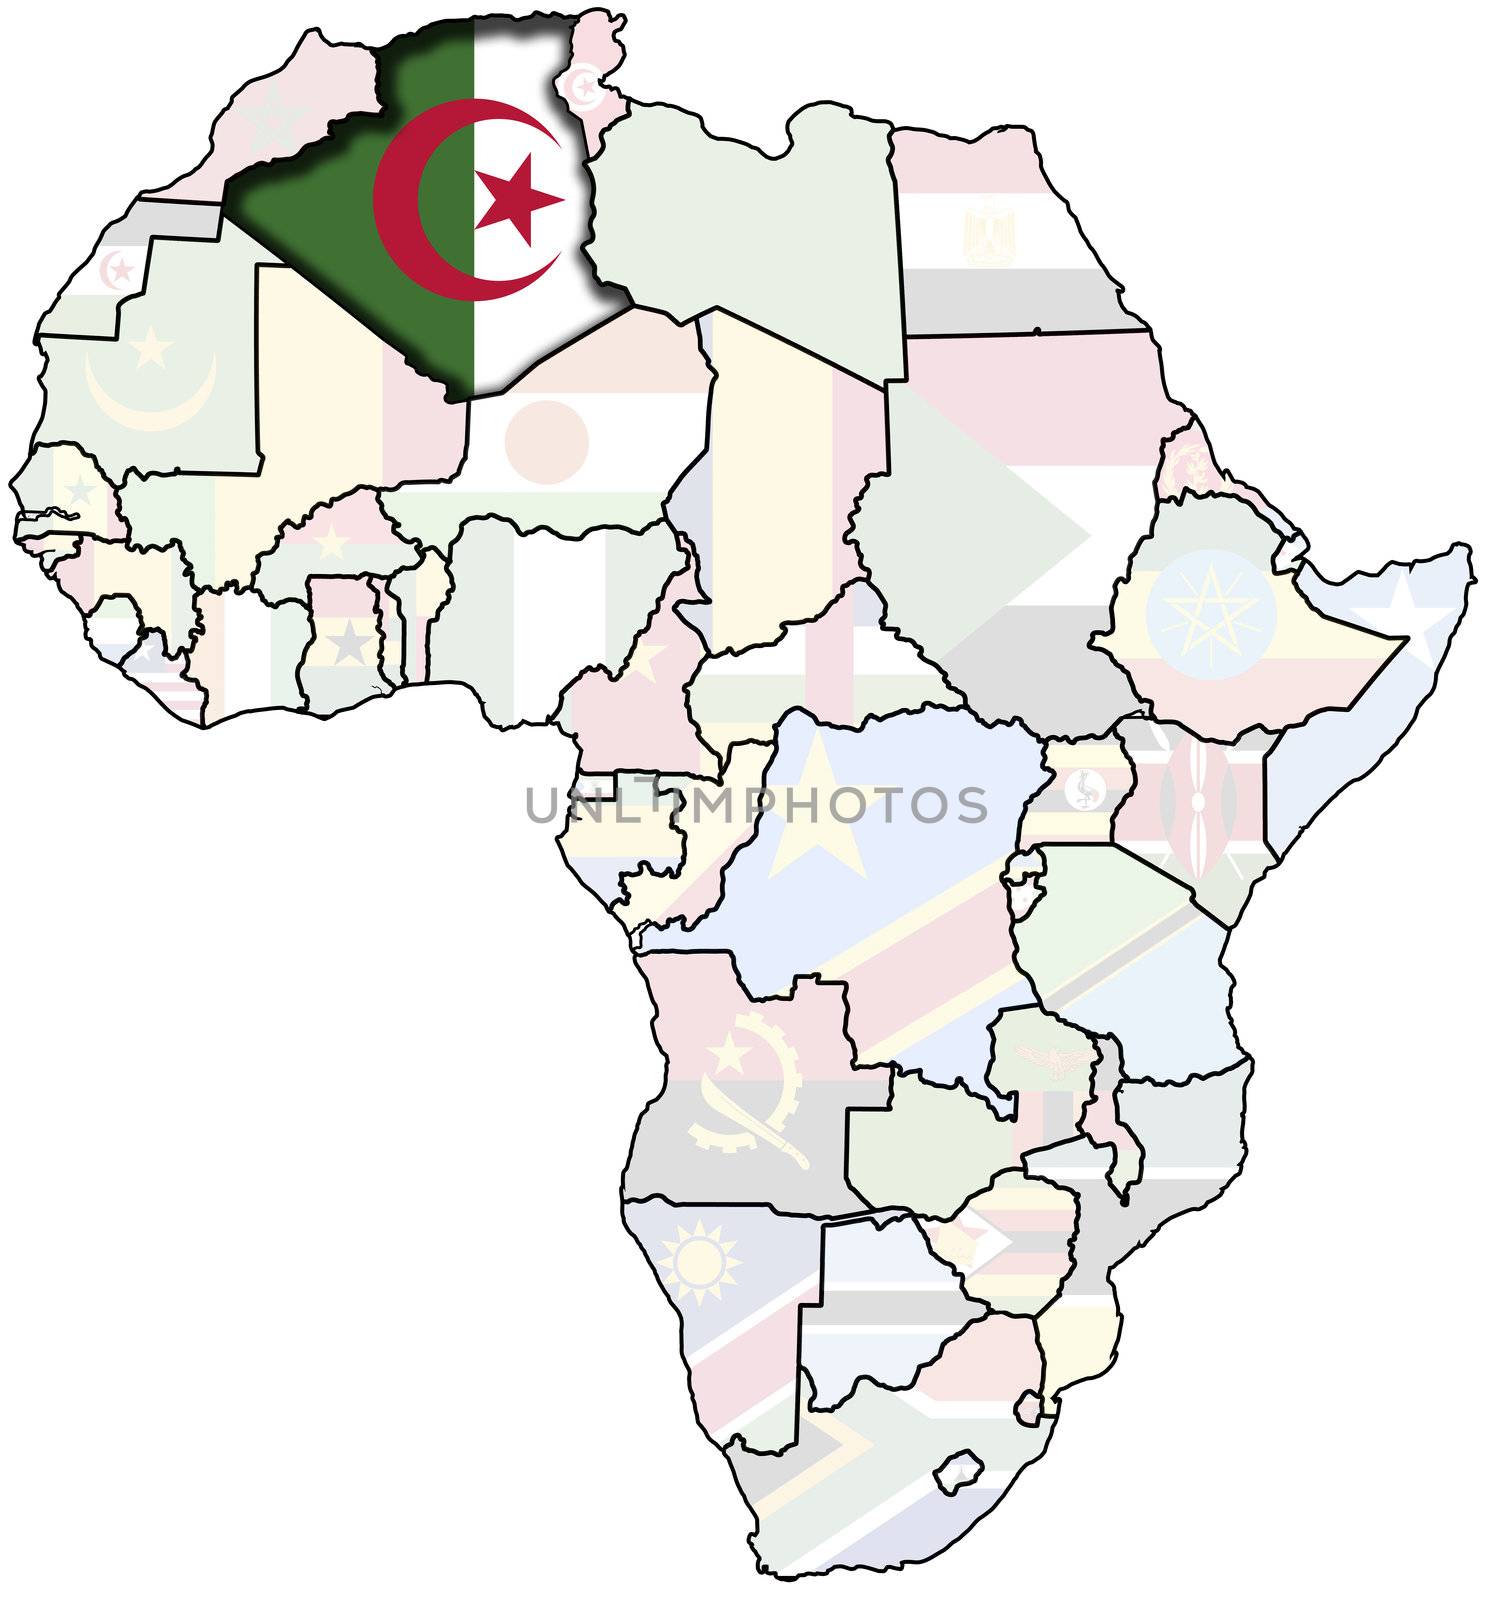 algeria on africa map by michal812